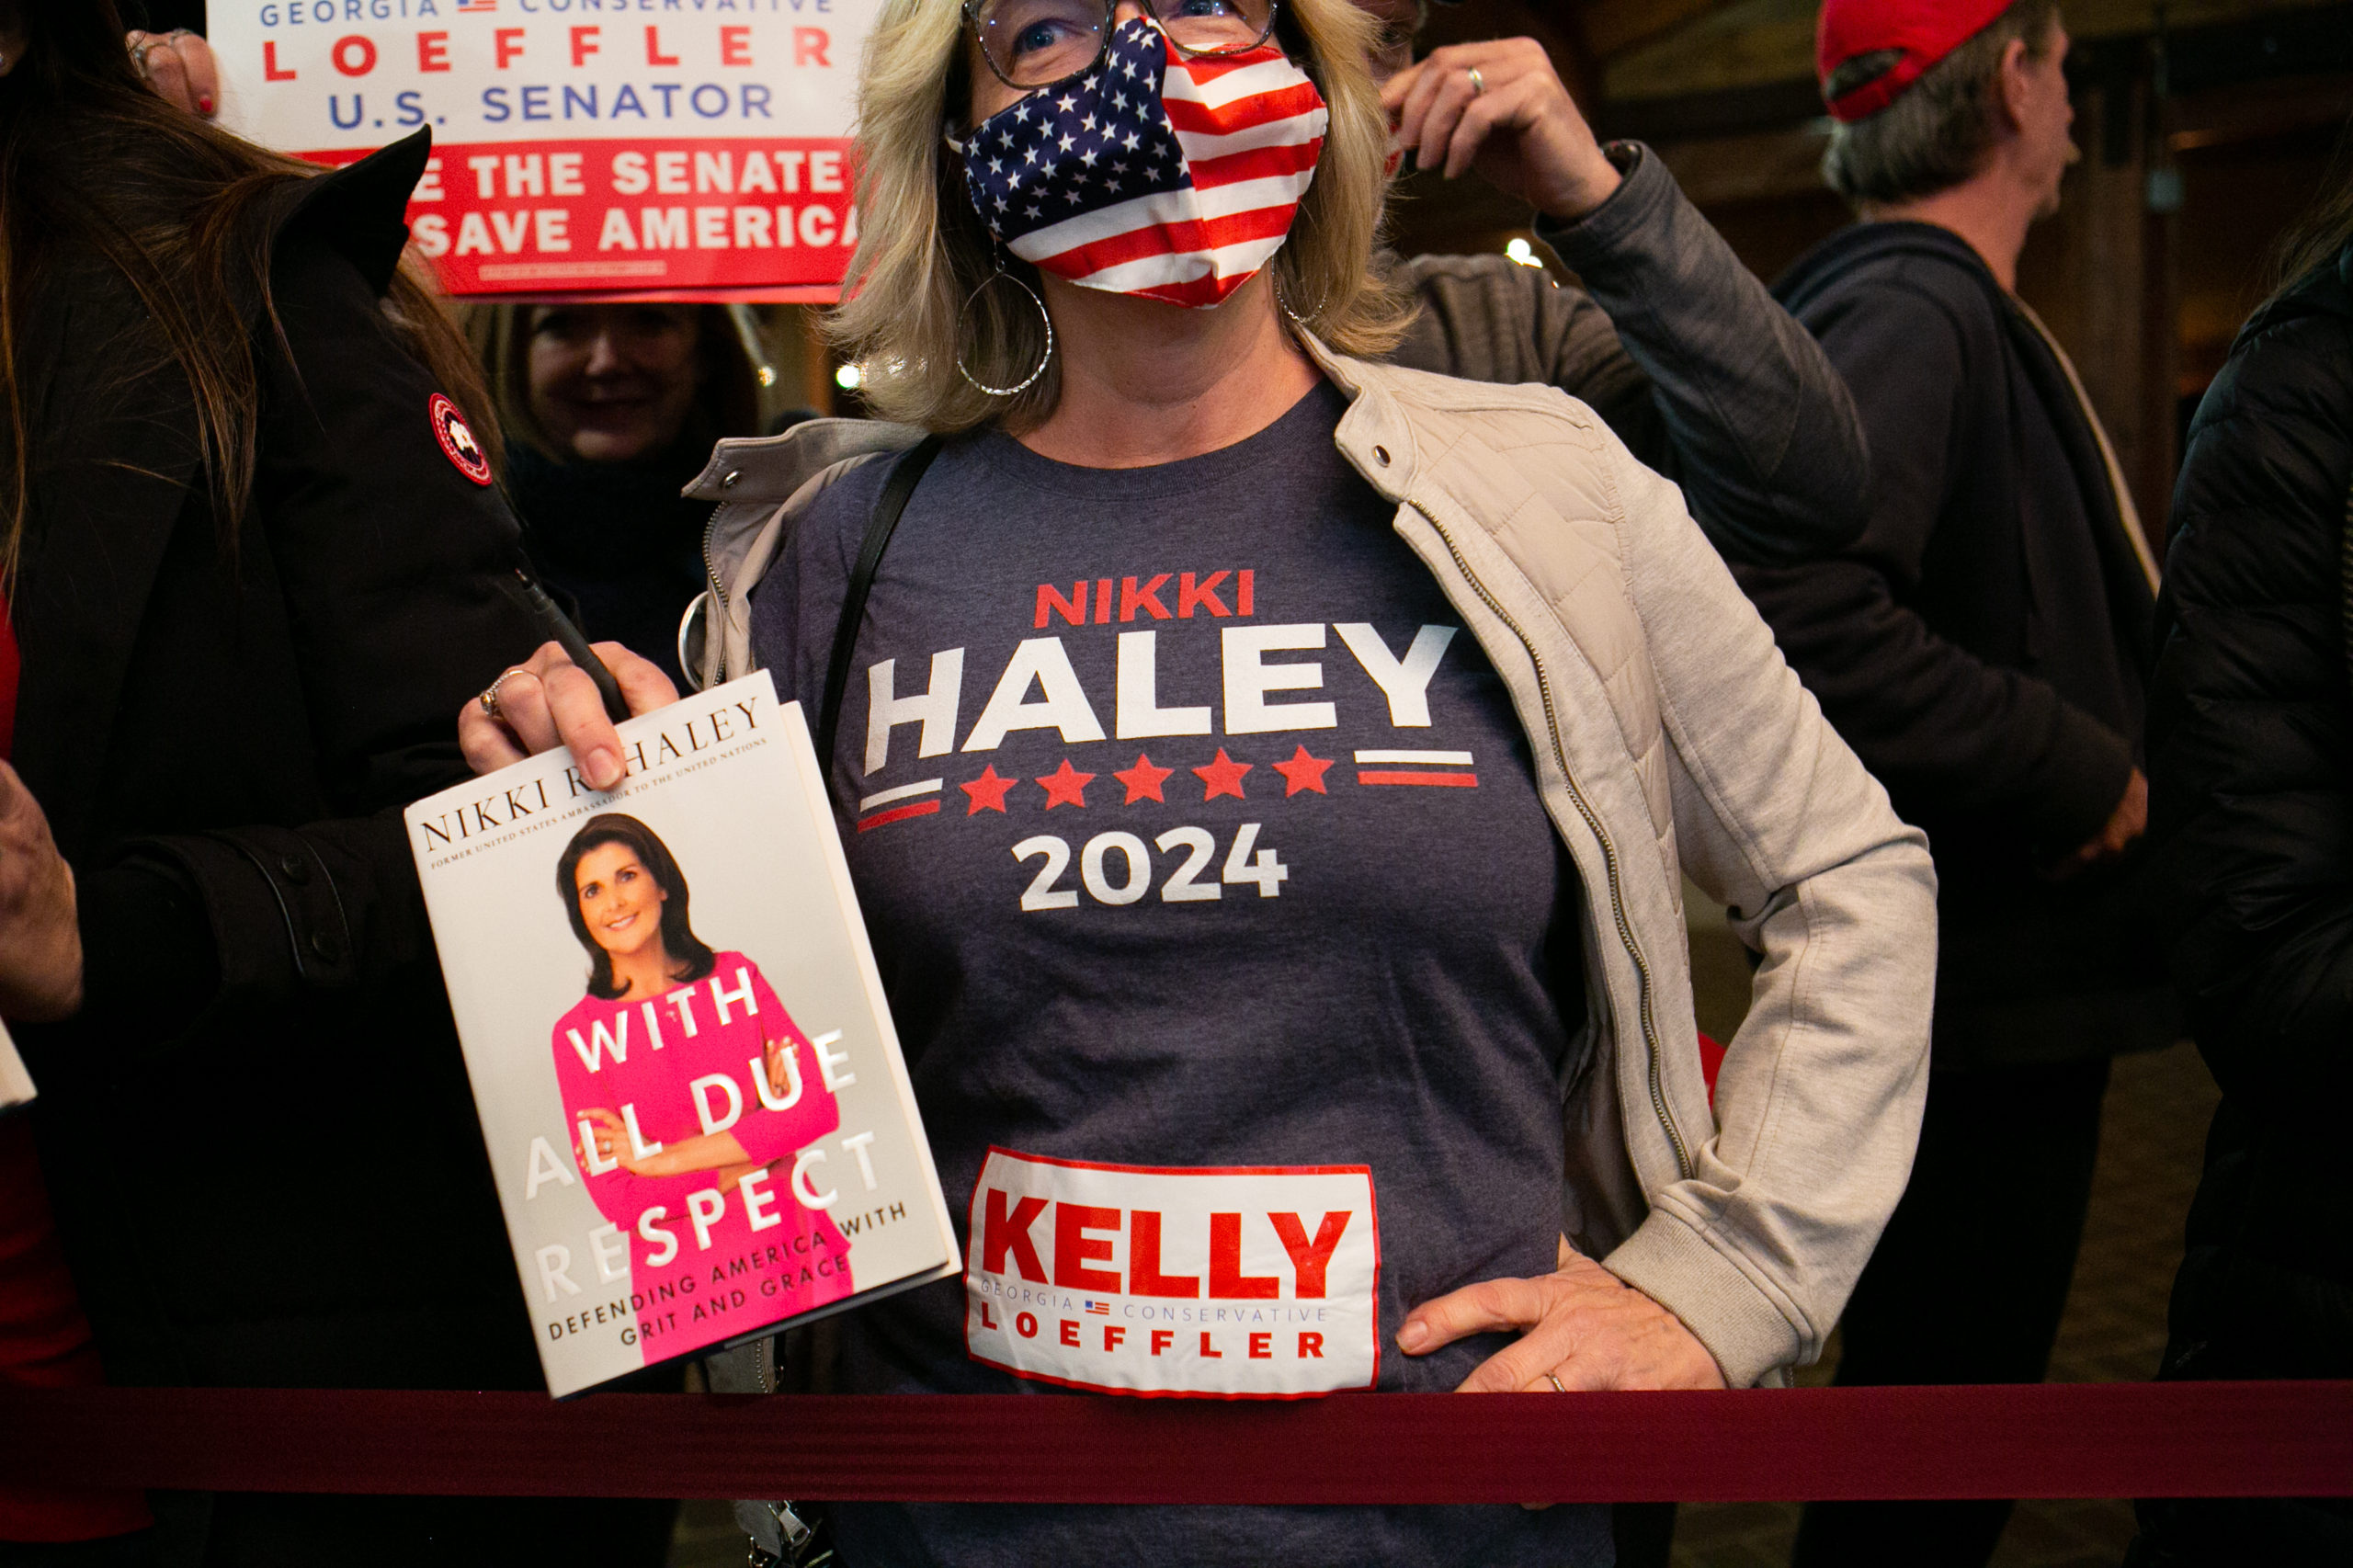 CUMMING, GA - DECEMBER 20: Tana Wagner waits to have her book signed by former U.N. Ambassador Nikki Haley during a campaign rally in support of Georgia Republican Senate candidates David Perdue (R-GA) and Kelly Loeffler (R-GA) on December 20, 2020 in Cumming, Georgia. (Photo by Jessica McGowan/Getty Images)